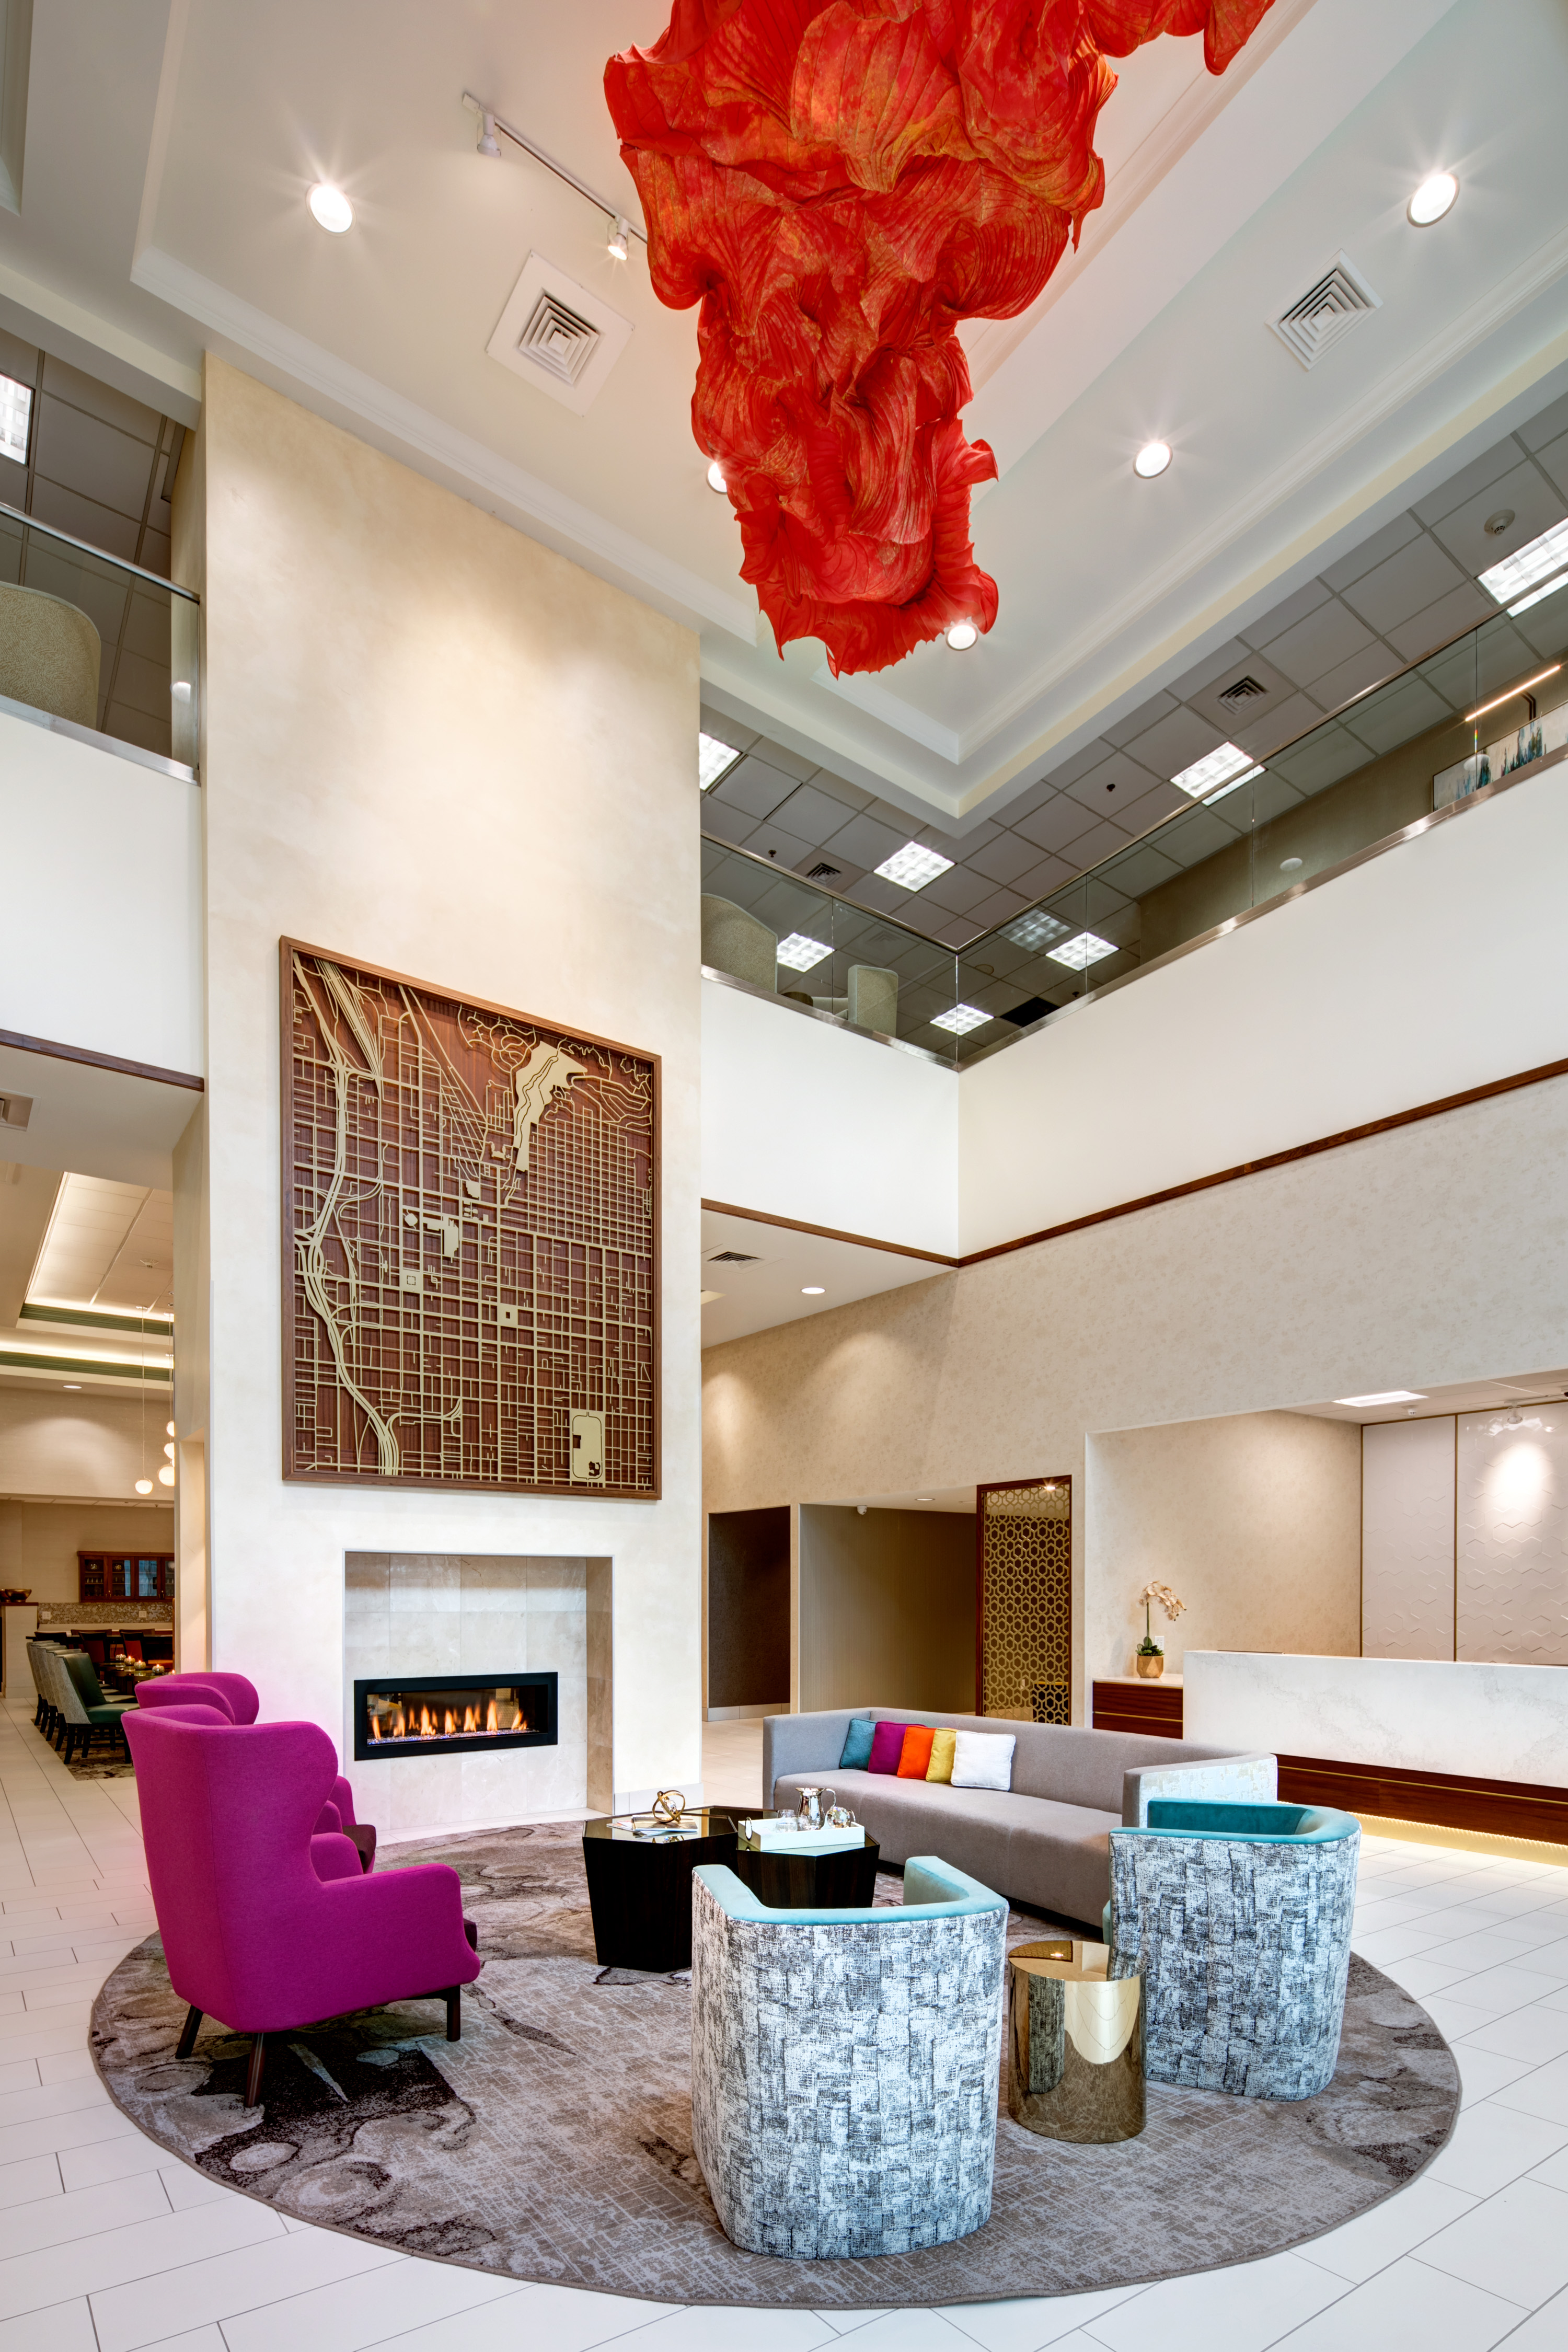 Atrium Seating With Fireplace, Art Feature Hanging From Ceiling, and View of Front Desk